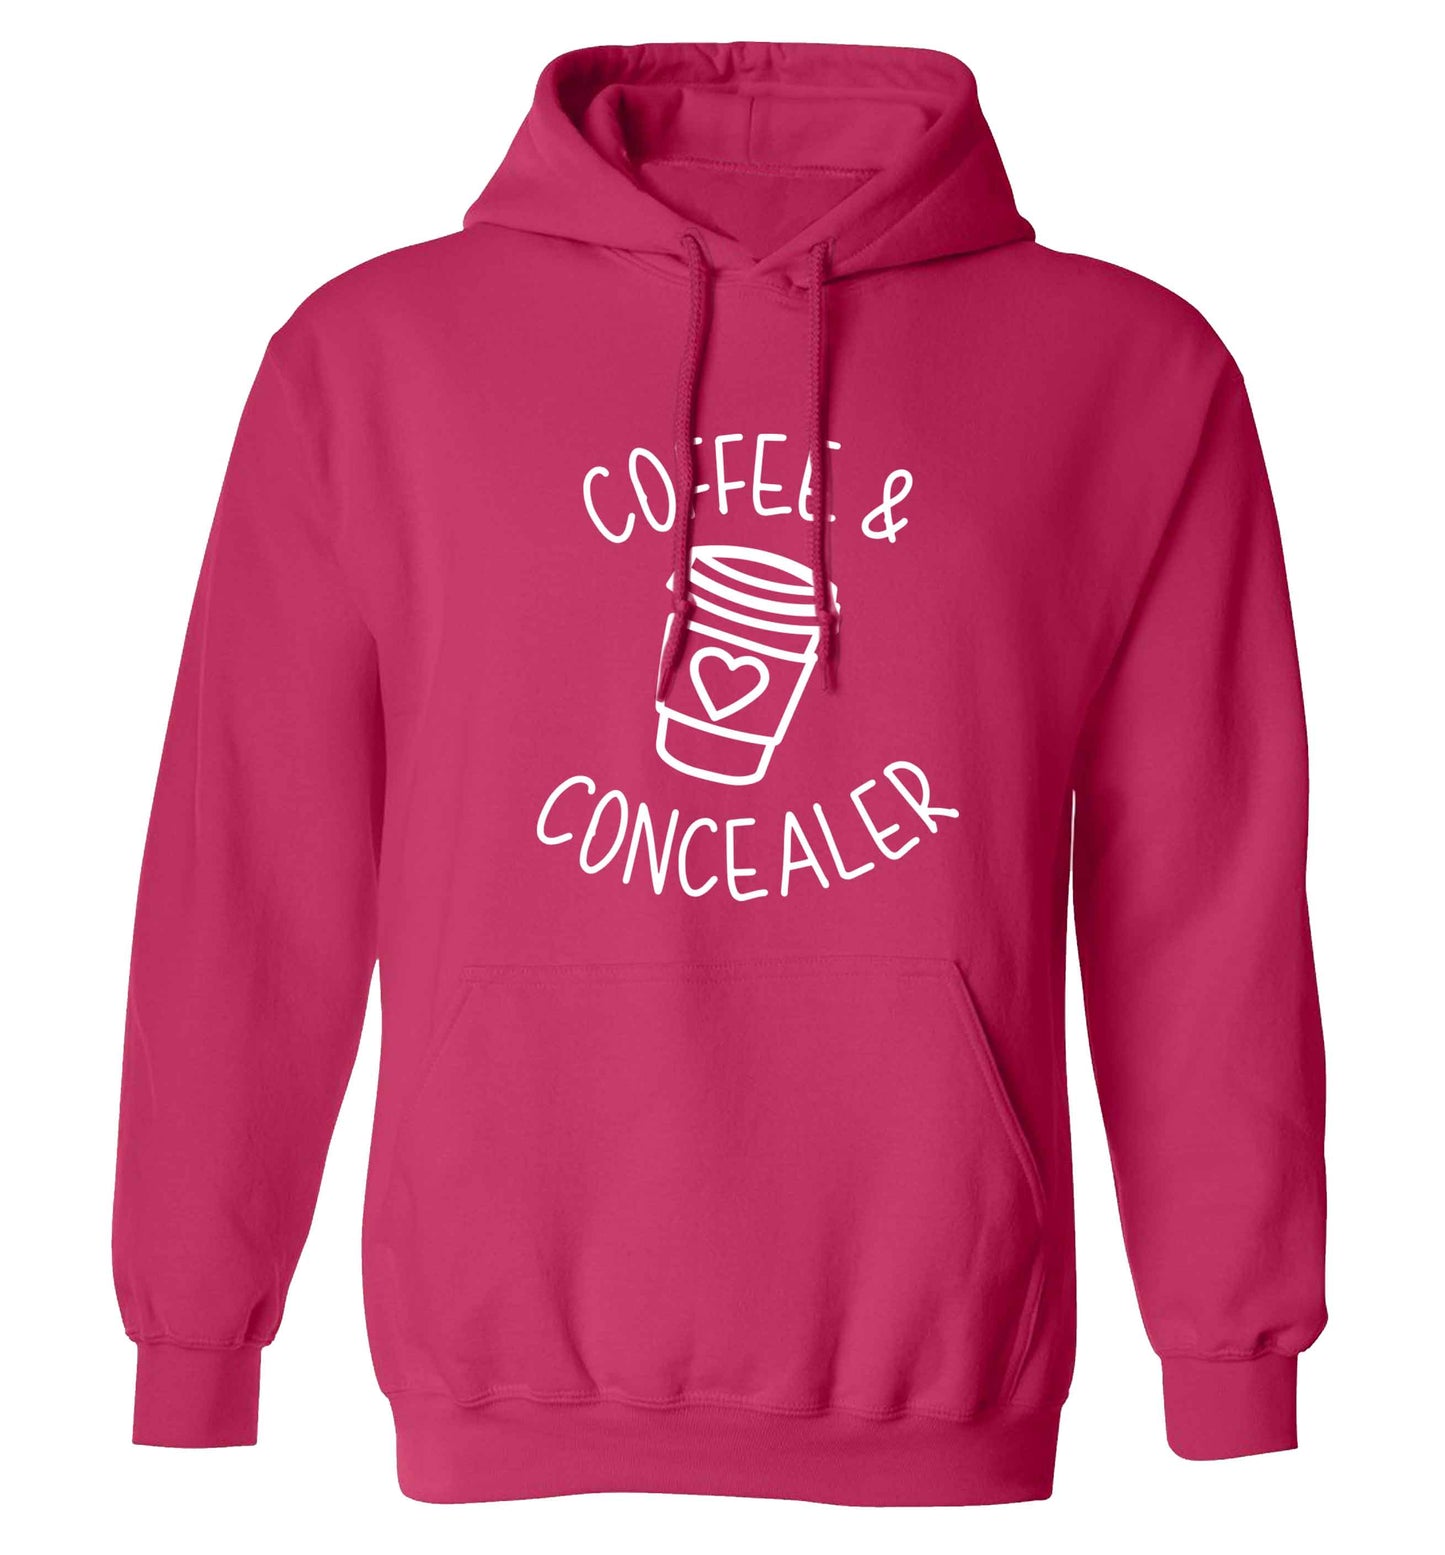 Coffee and concealer adults unisex pink hoodie 2XL